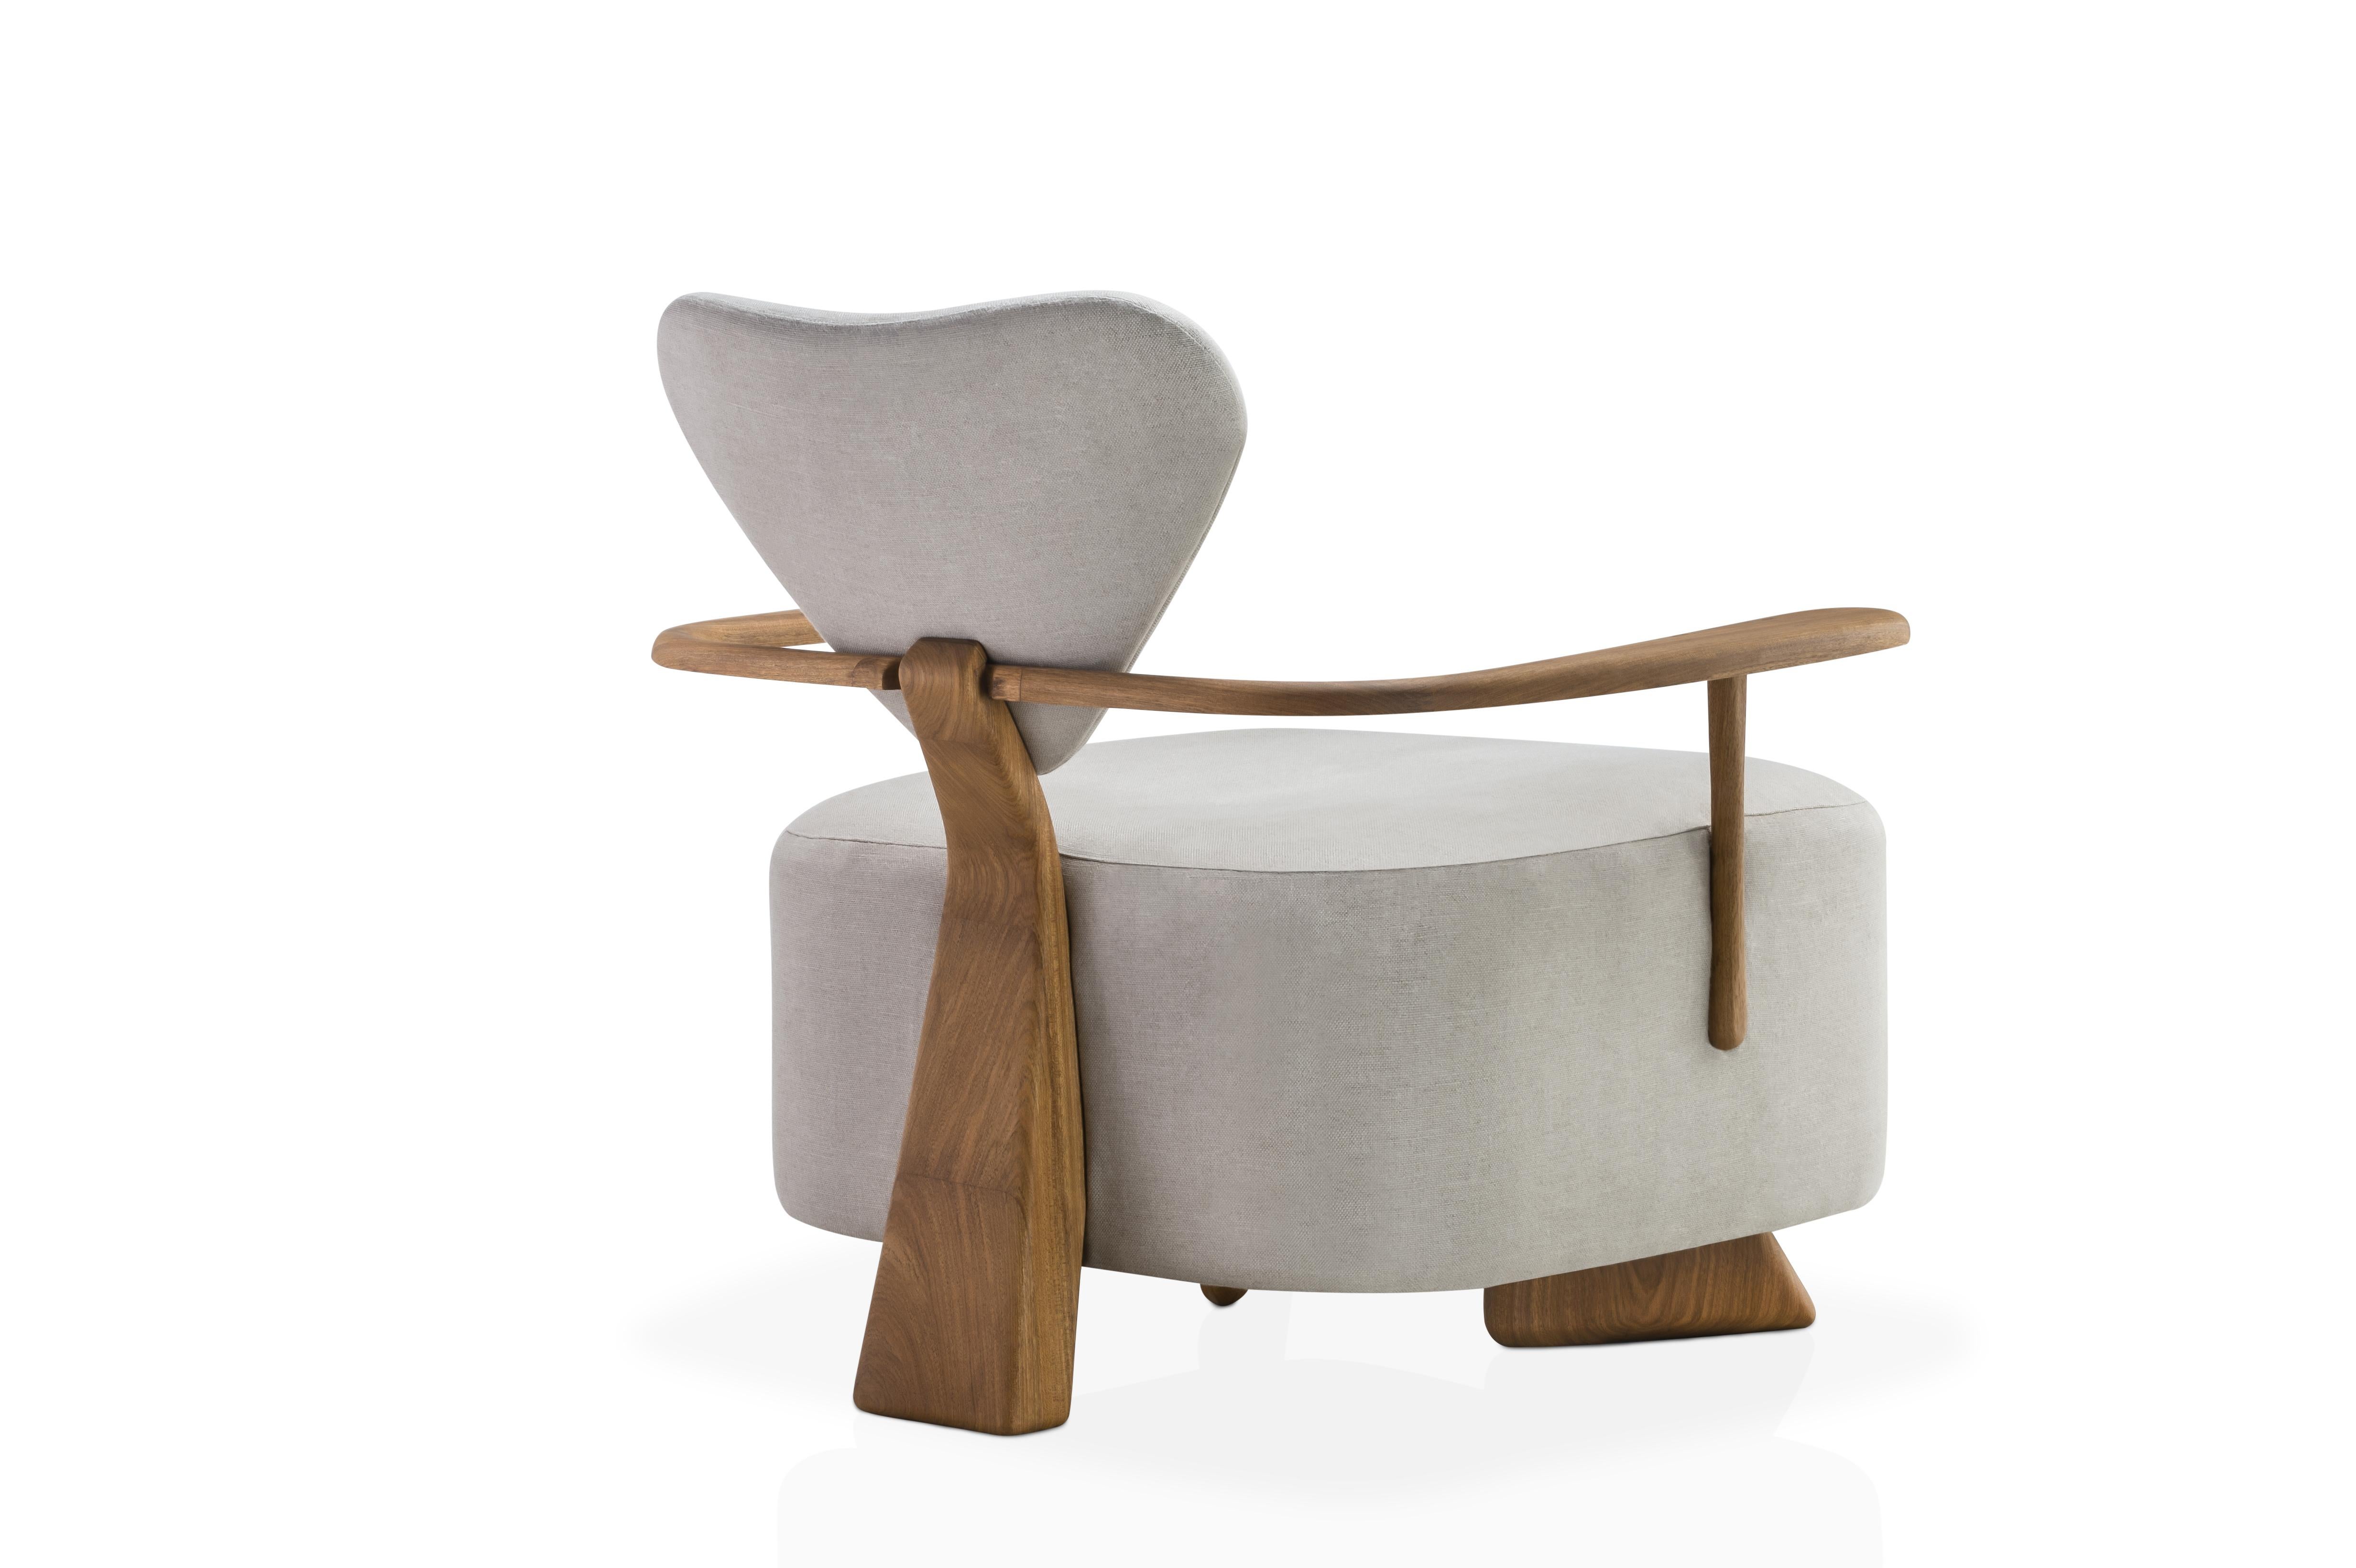 Modern Contemporary Lounge Chair in Solid Brazilian Walnut Wood by Juliana Vasconcellos